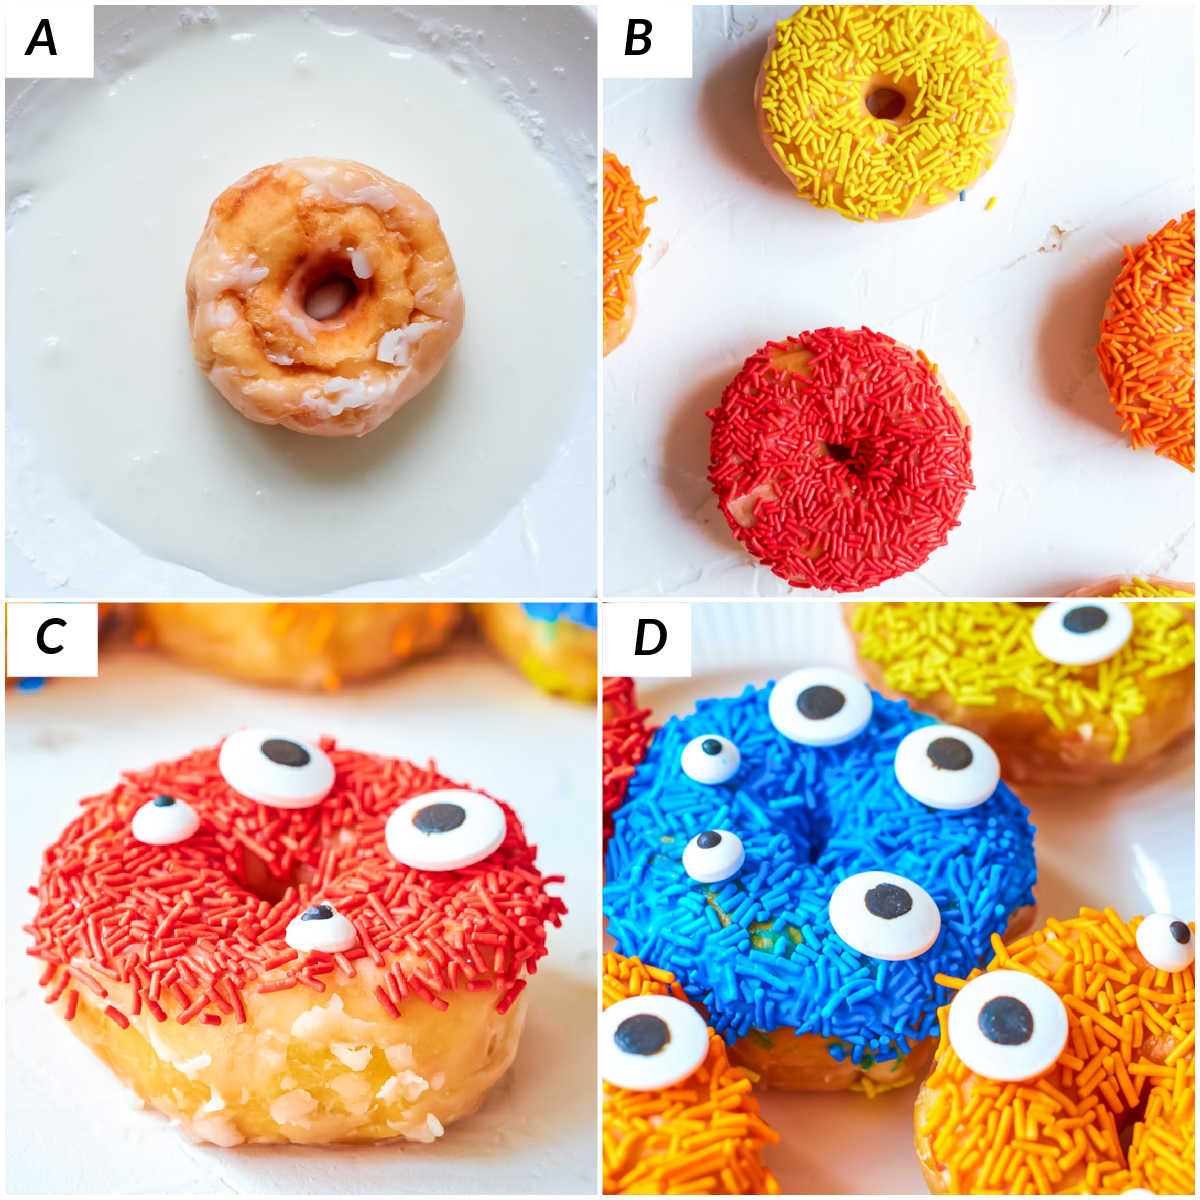 image collage showing the steps for making halloween donuts